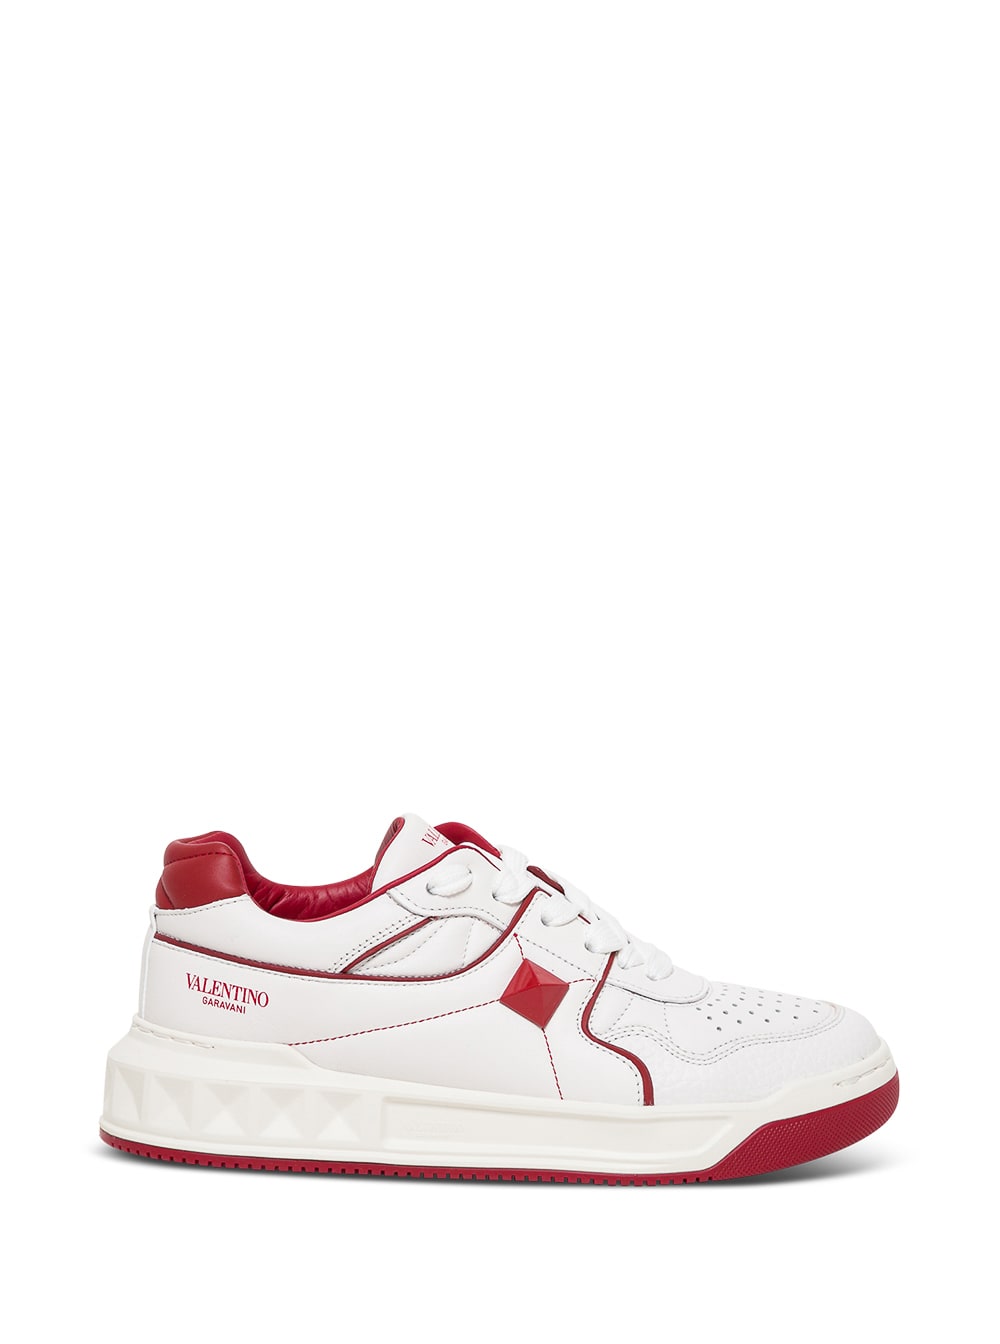 VALENTINO GARAVANI LOW TOP WHITE AND RED LEATHER SNEAKERS,WW2S0CS4NWNR81